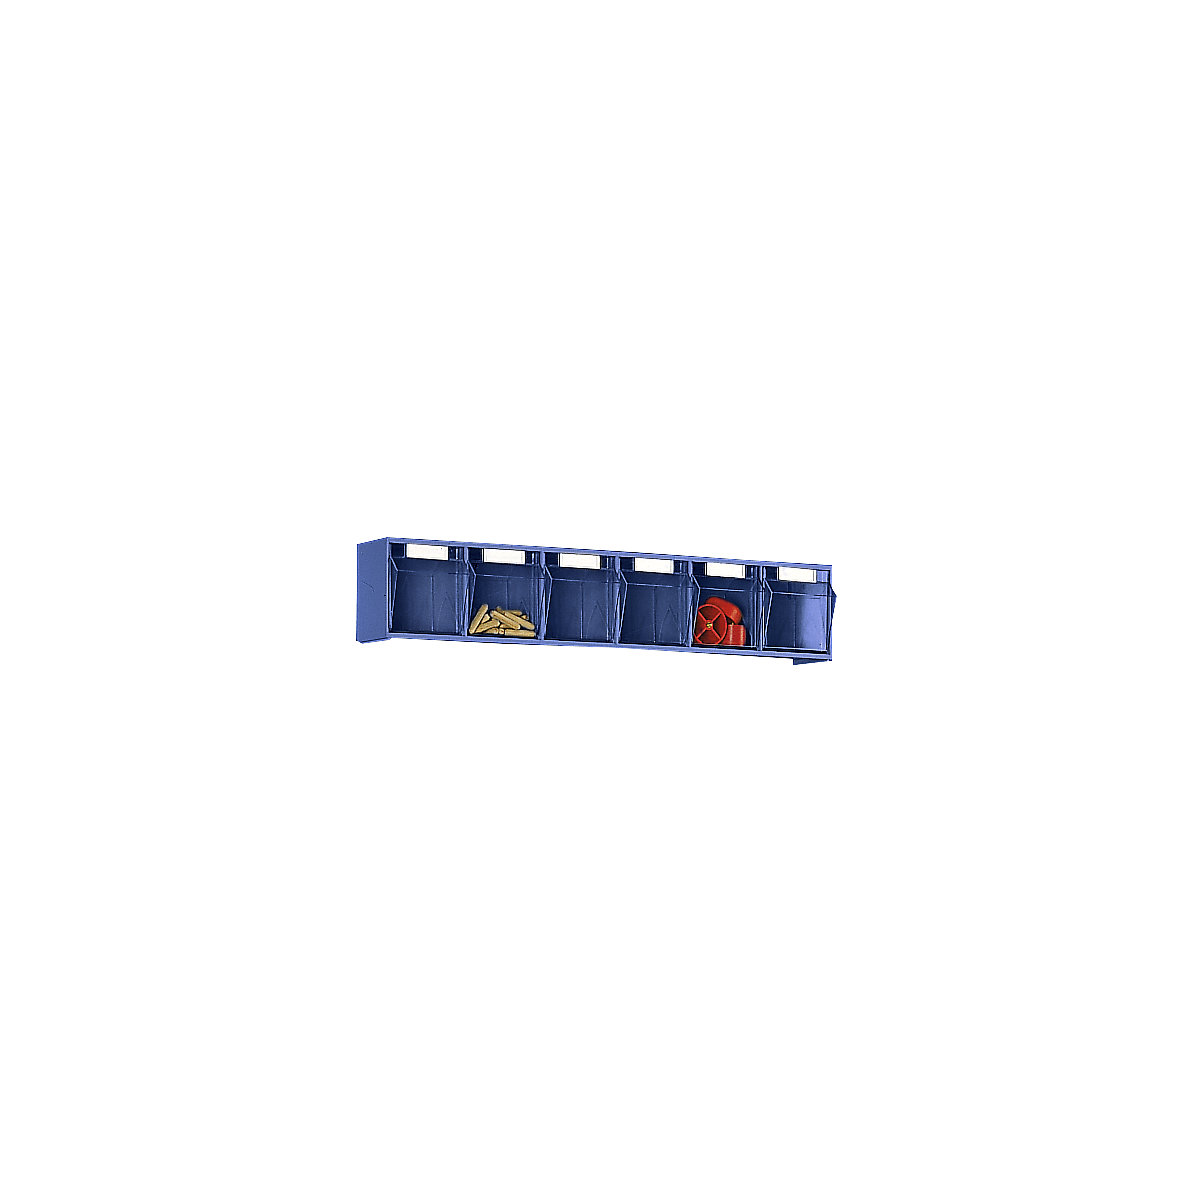 Visual storage container system, housing HxWxD 113 x 600 x 91 mm, 6 bins, blue-7